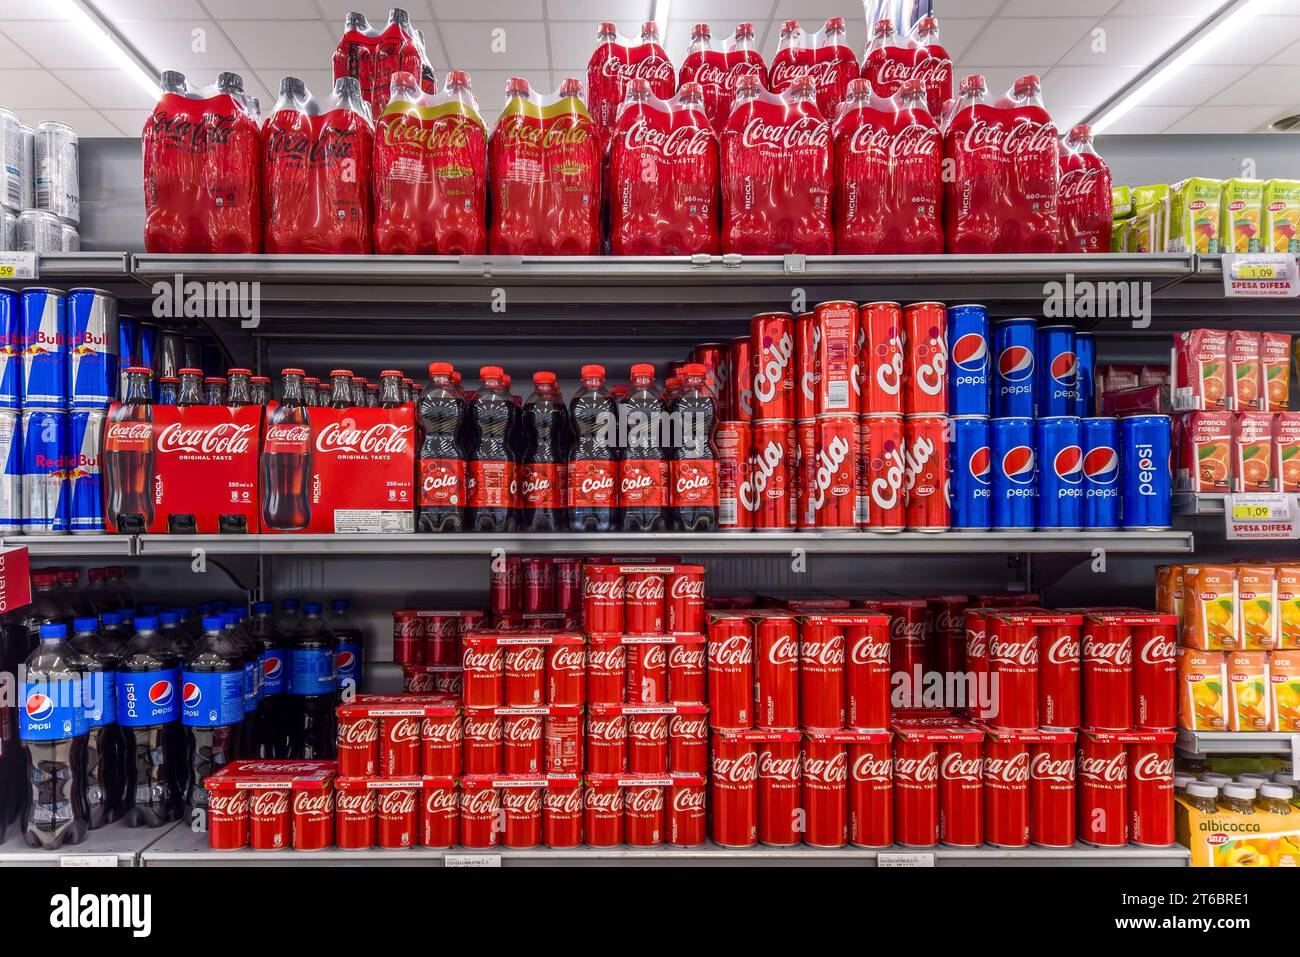 Italy - November 09, 2023: Coca Cola in plastic bottles, cans and glass bottles with packaged Pepsi Cola bottles and cans on shelves for sale in Itali Stock Photo